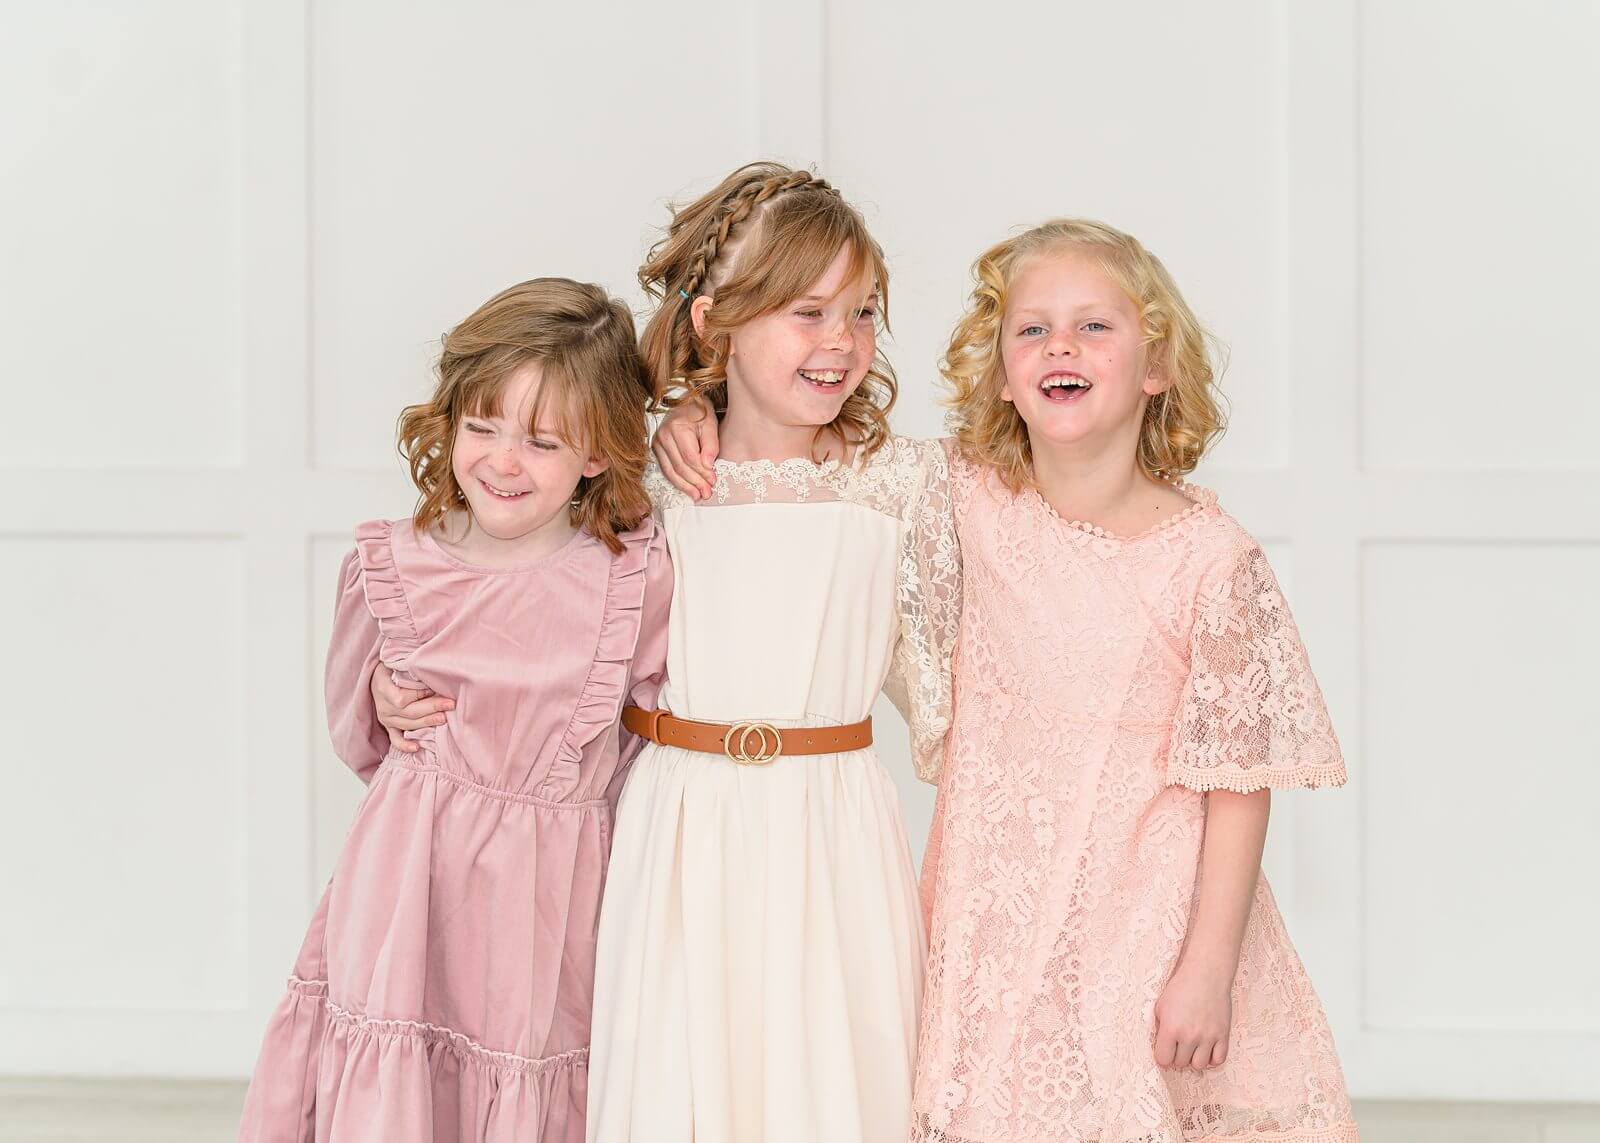 three young girls in pink, cream, and peach colored dresses laugh during their portraits at the Blank Space Studios